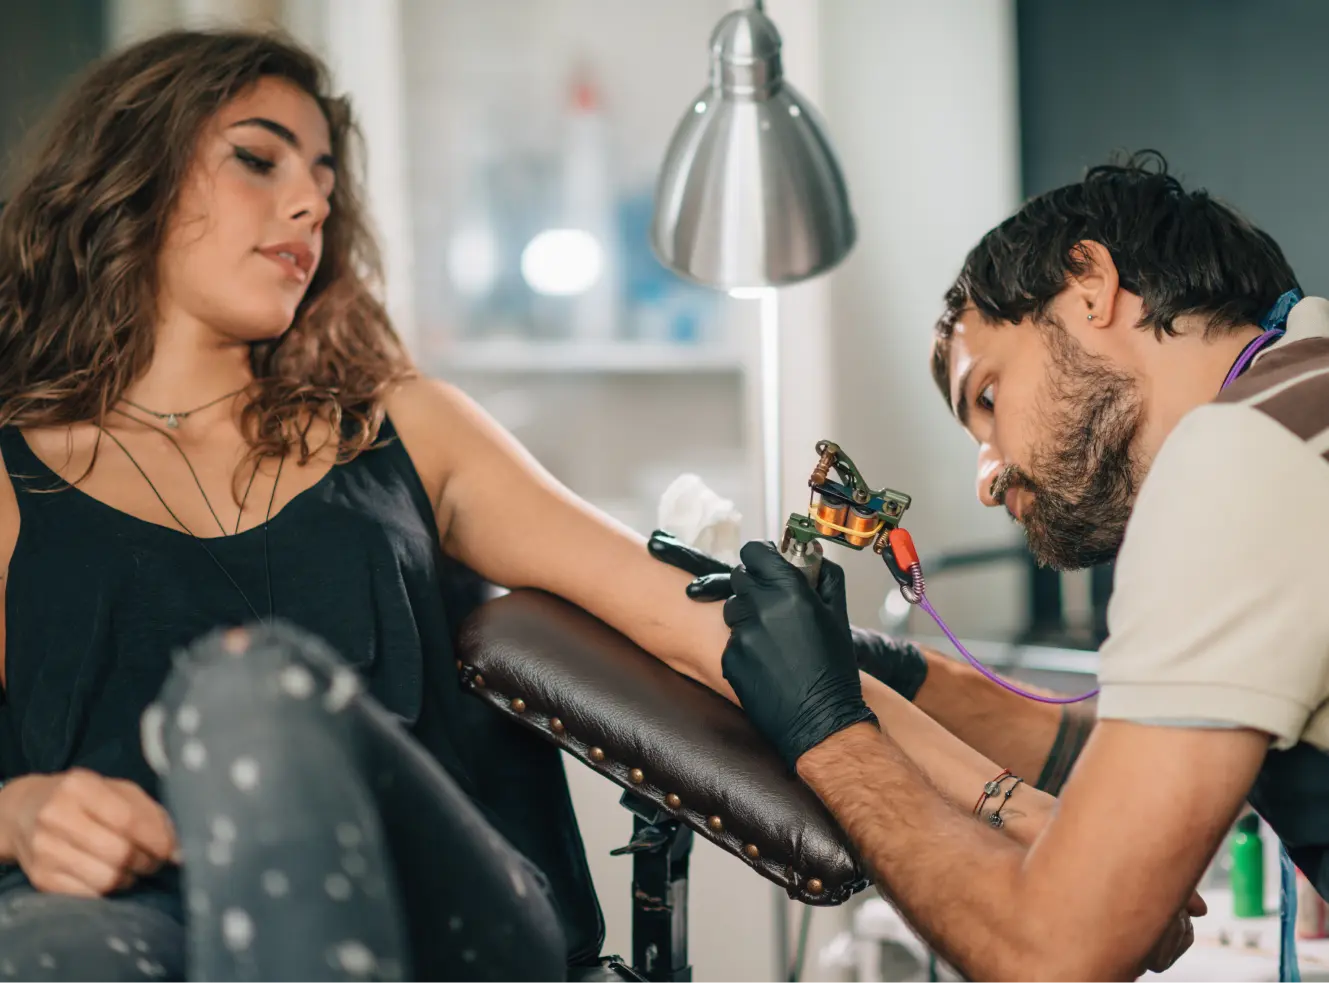 A girl gets a tattoo